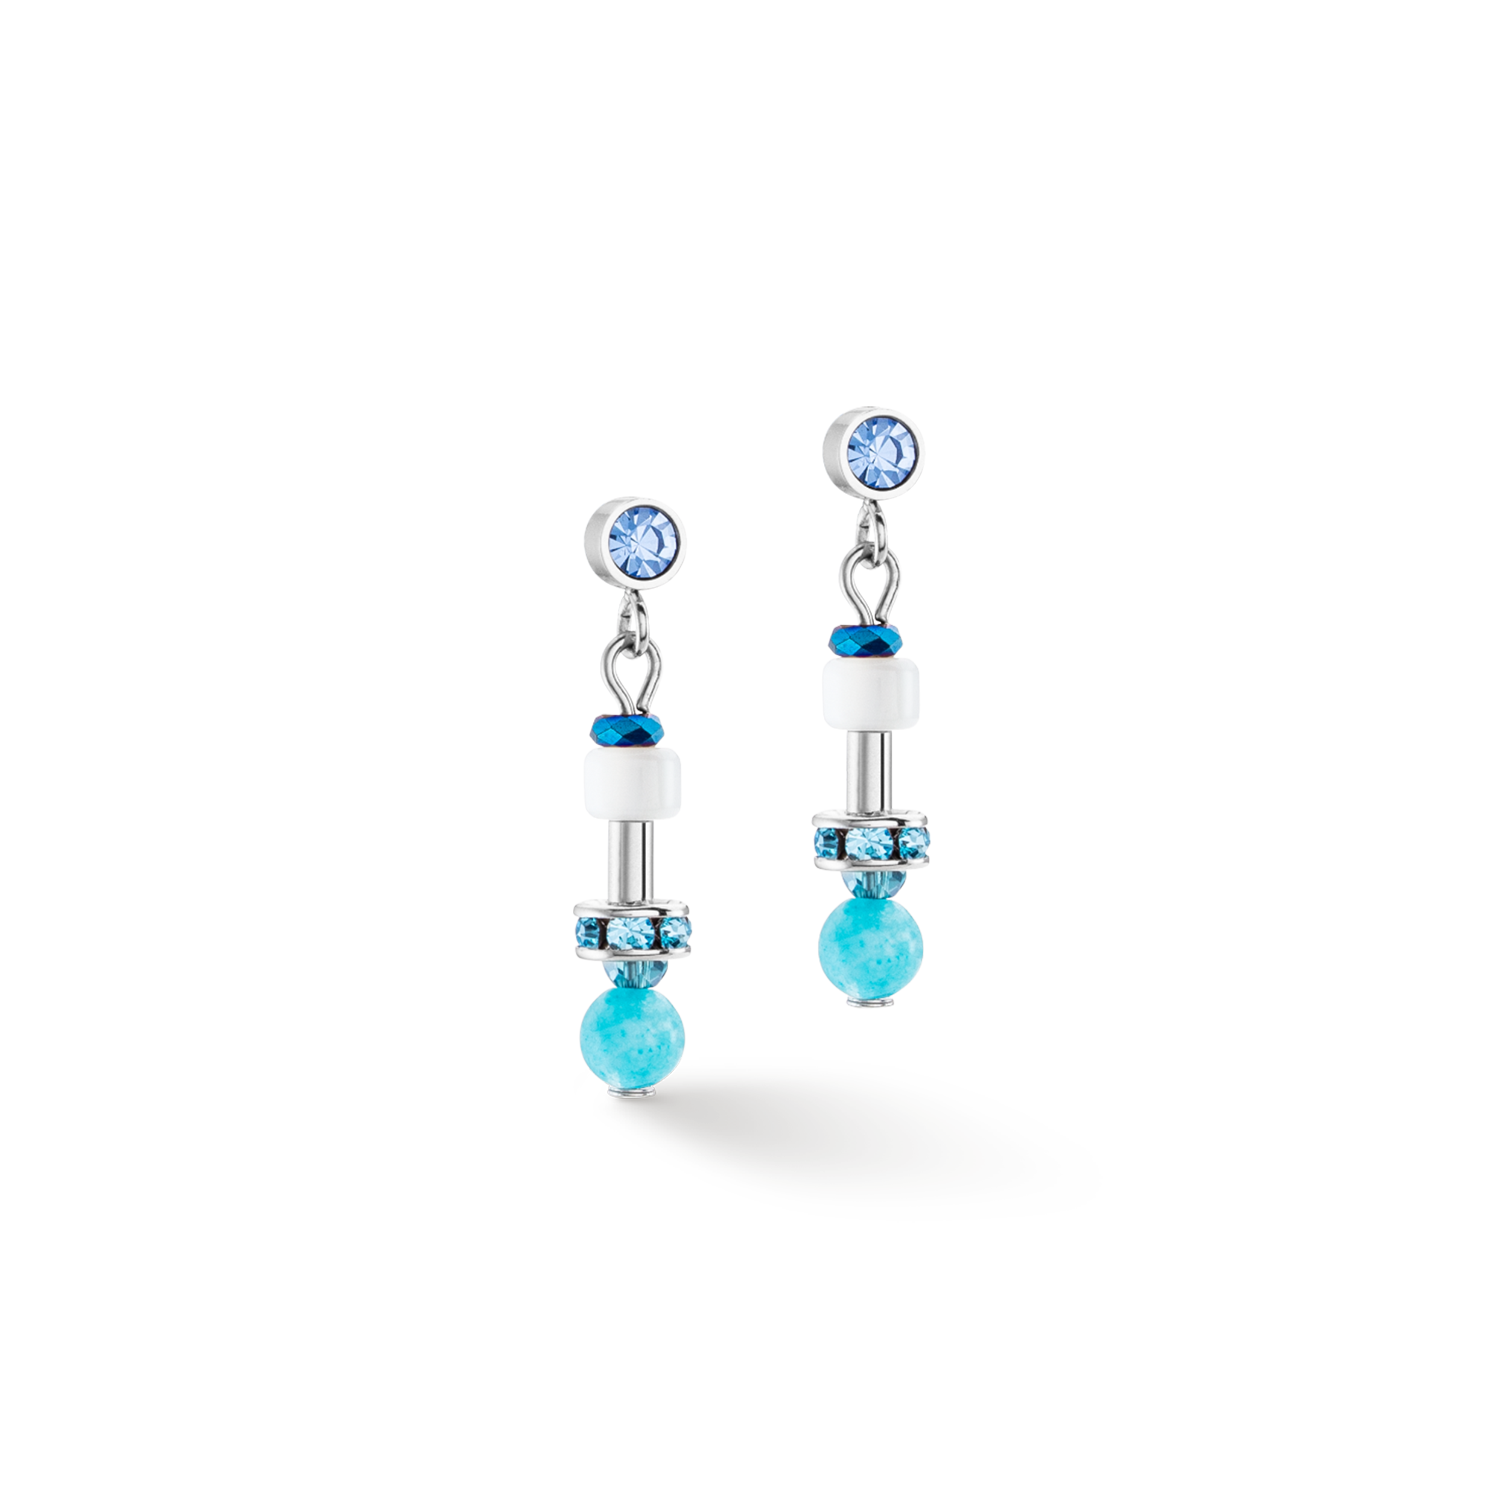 Earrings Princess Spheres Mix turquoise